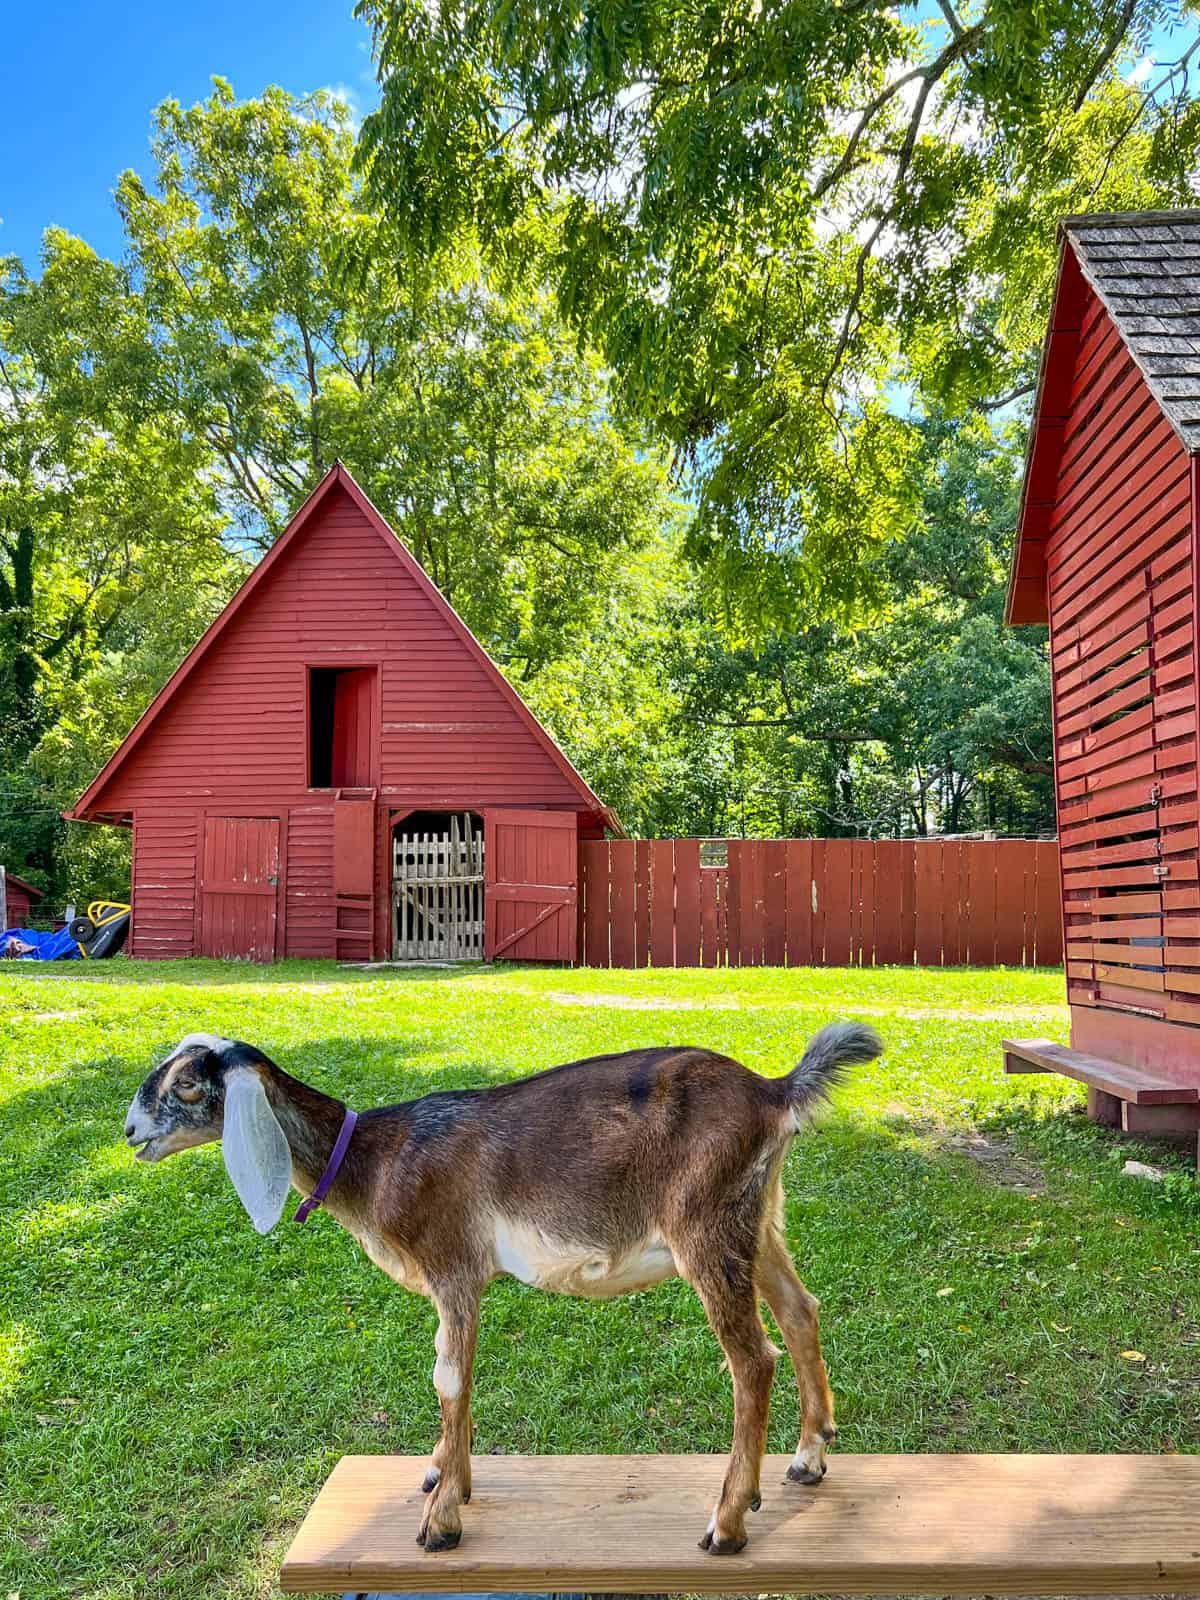 goat standing by barn